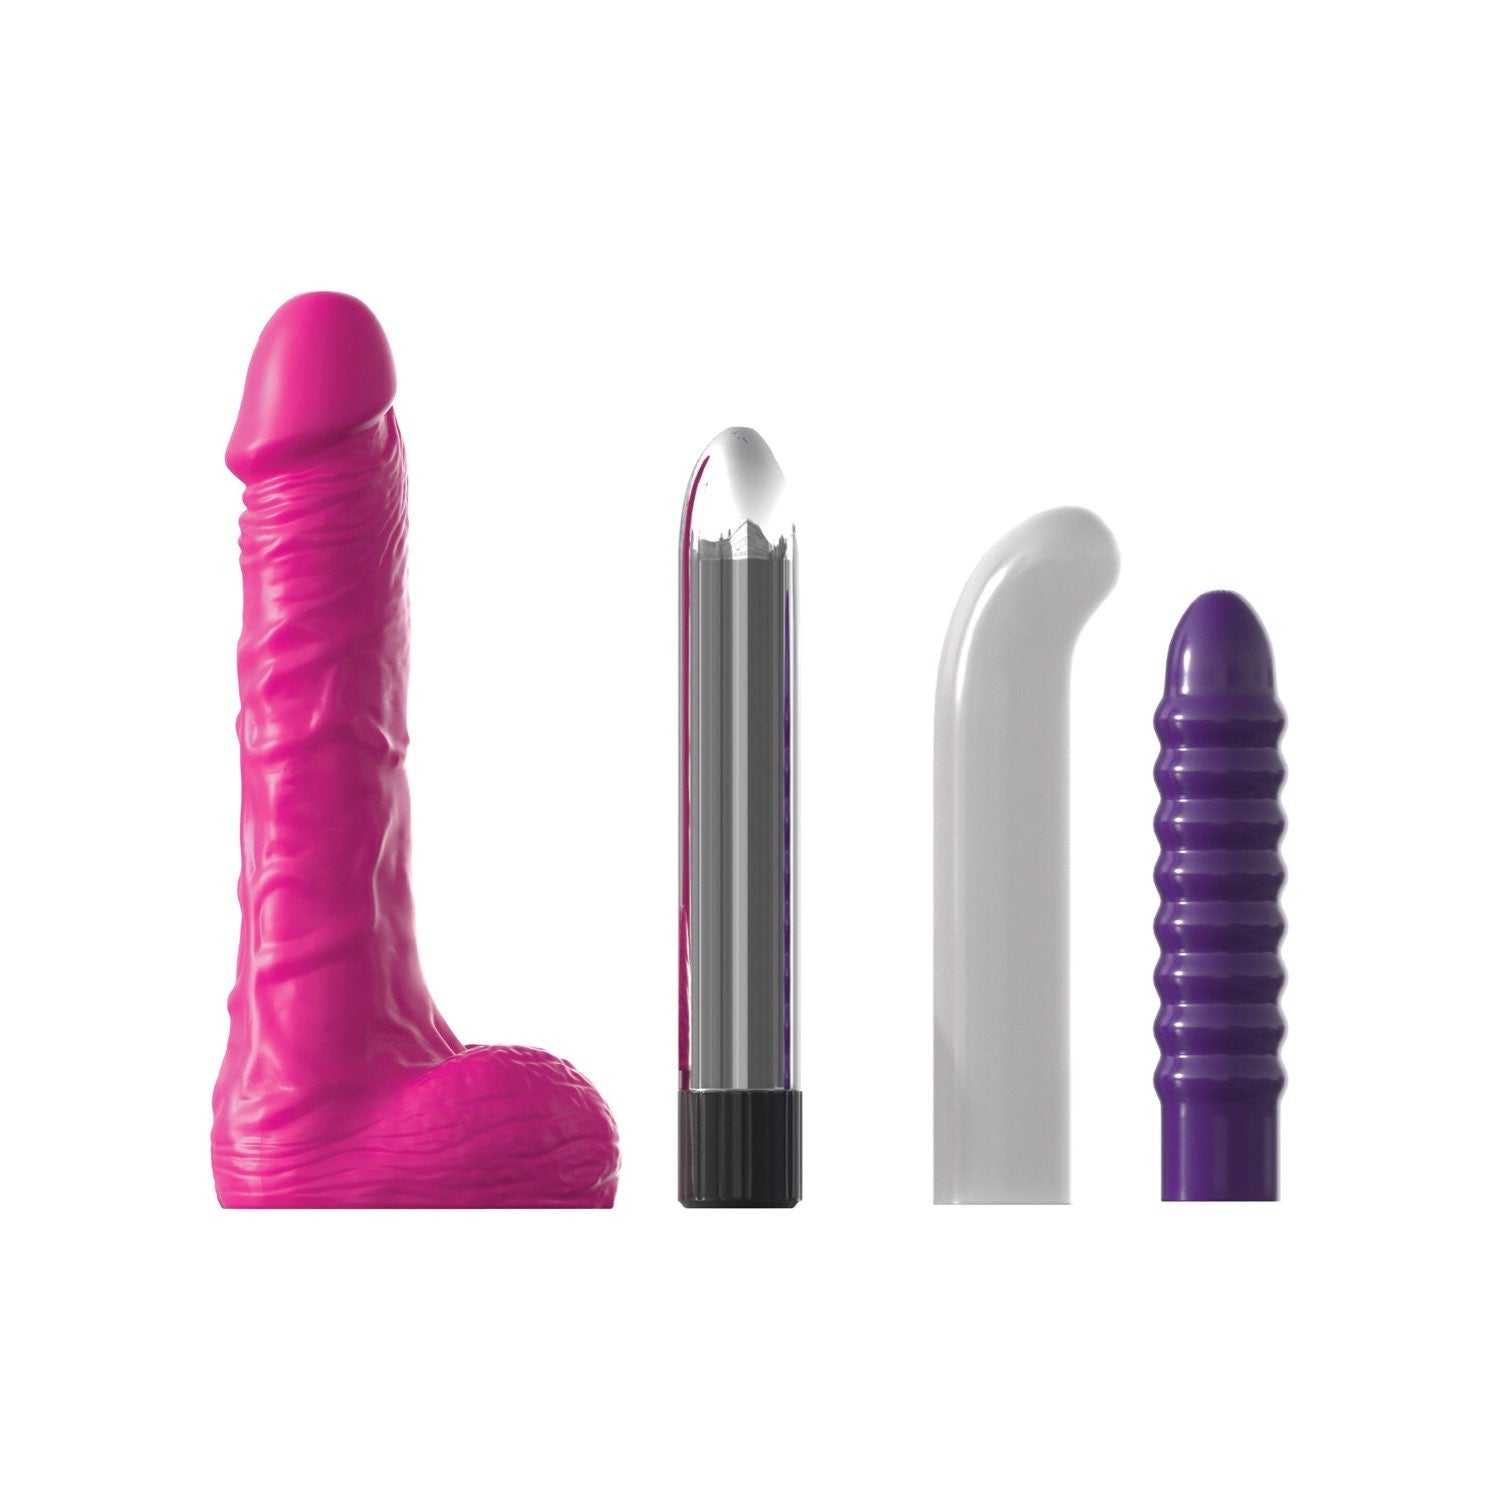  Wet &amp; Wild Pleasure Collection - Couples Kit - 18 Piece Set by Pipedream